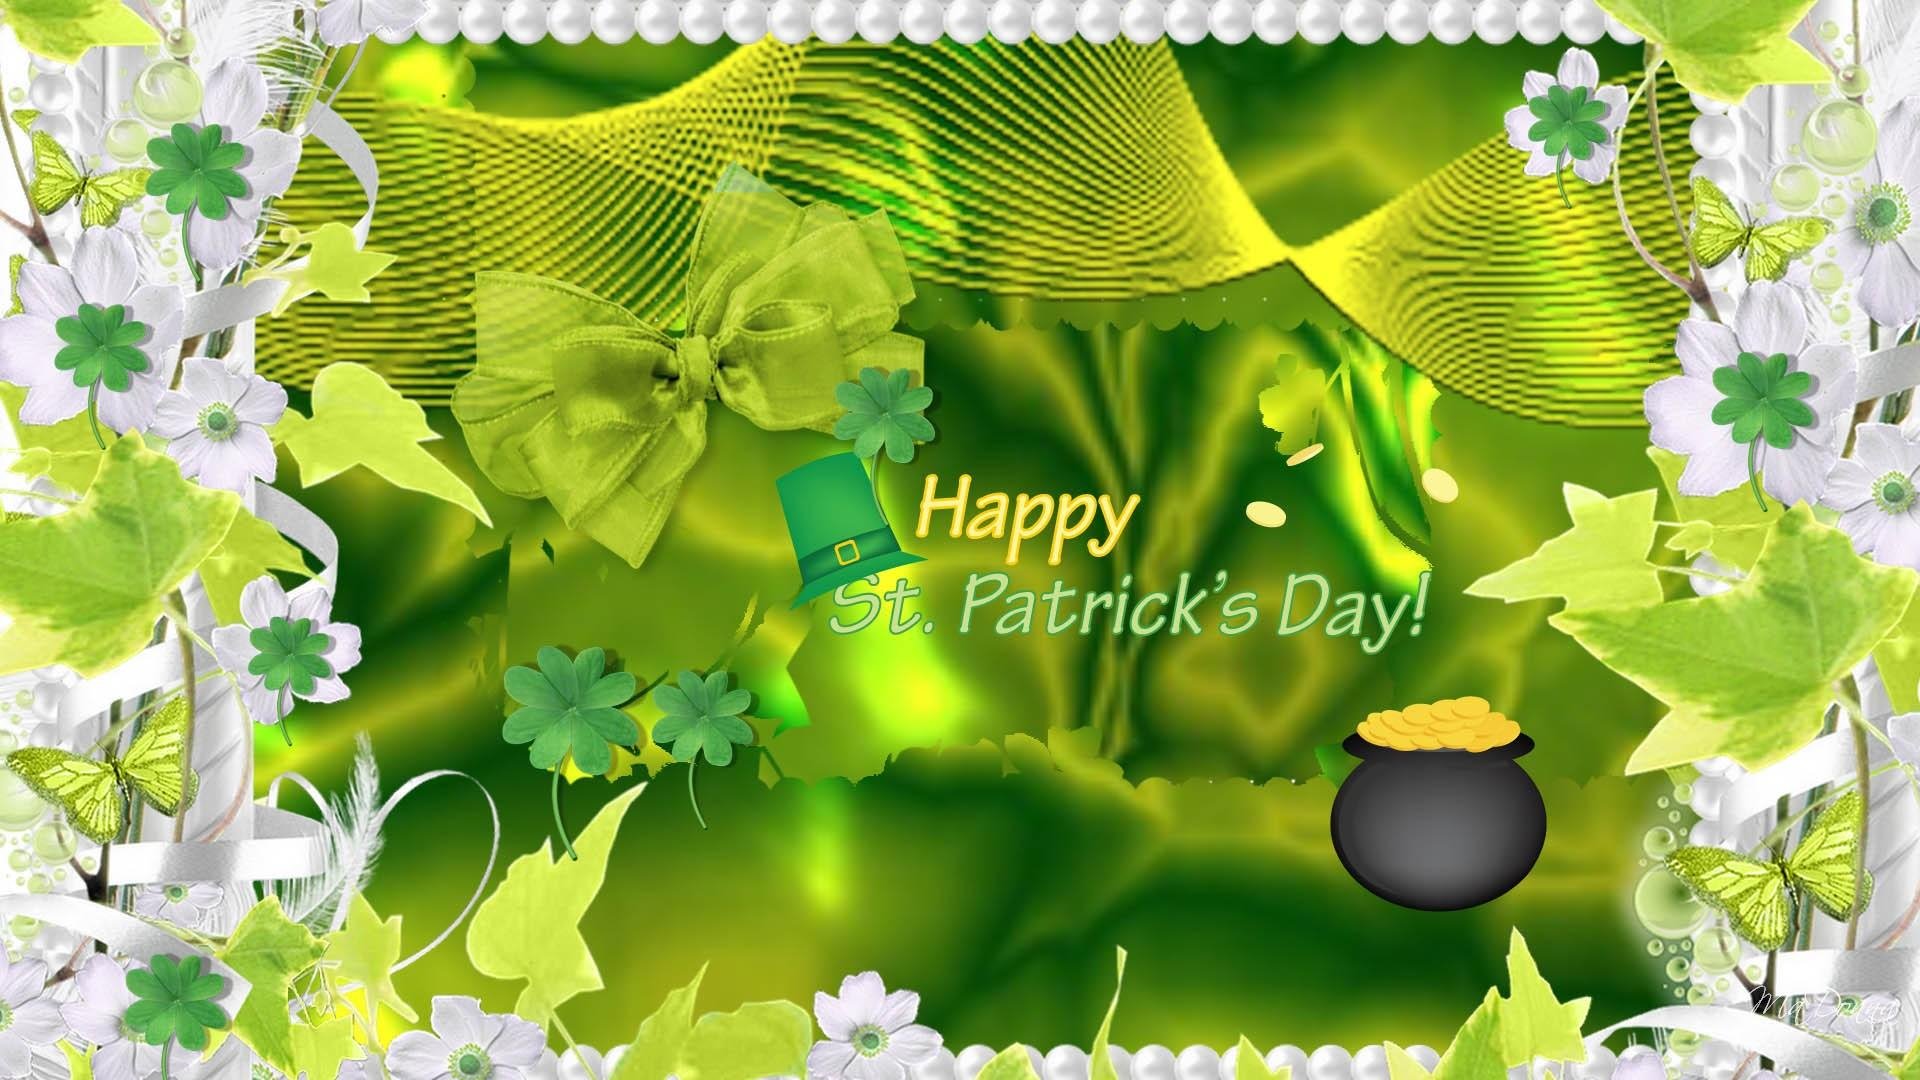 St. Patrick's Day Full HD Wallpaper and Background Image | 1920x1080